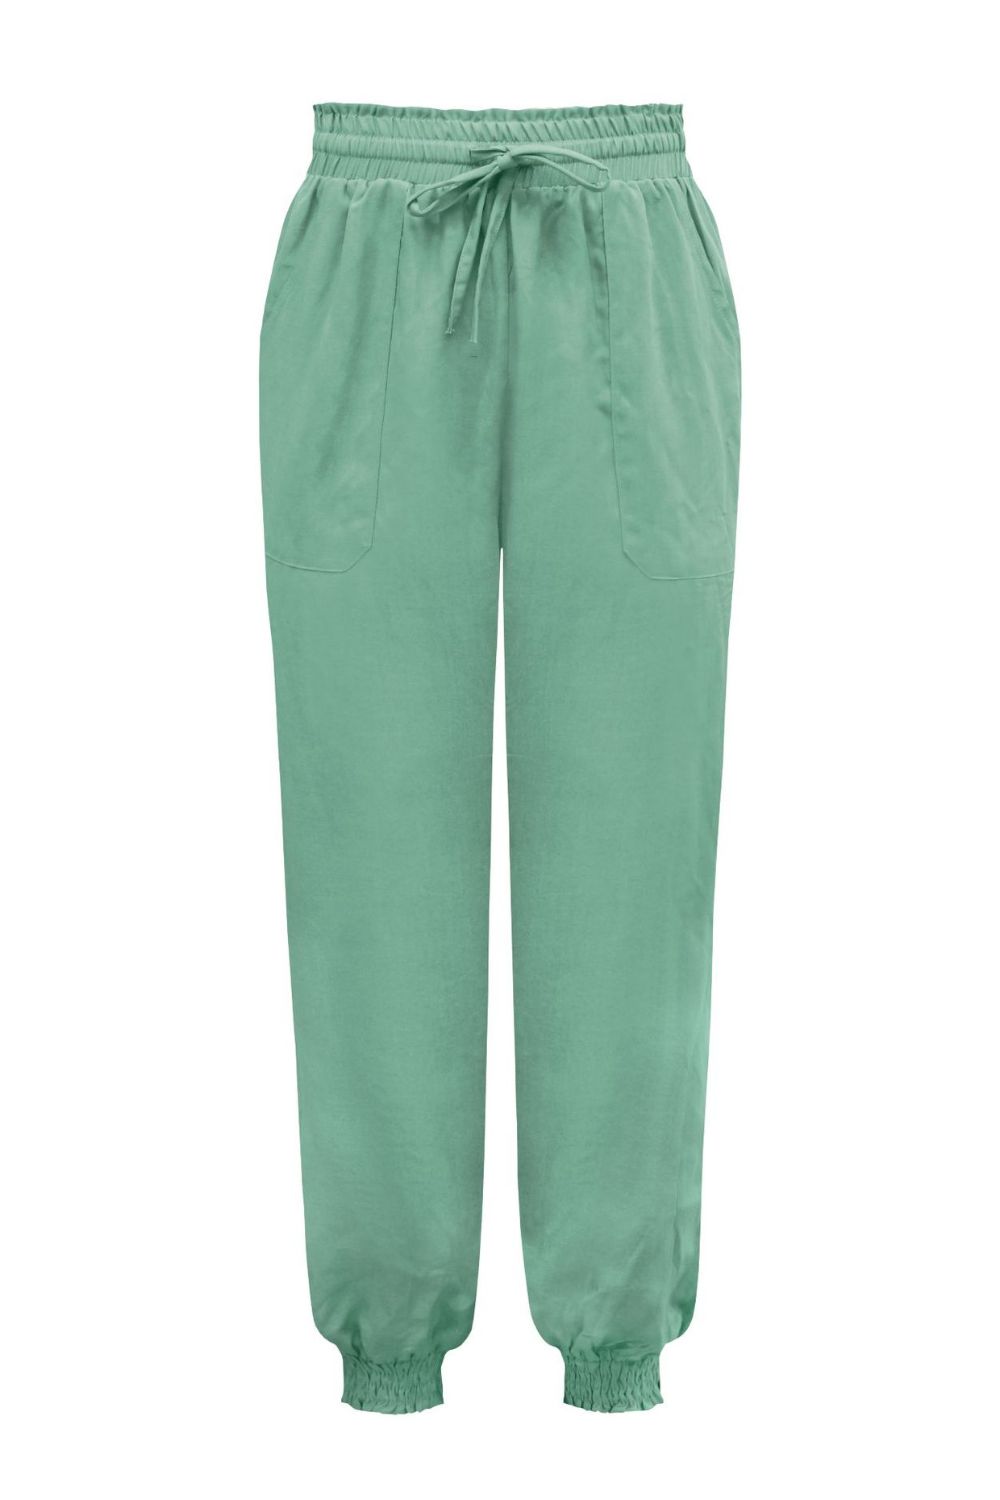 GUM LEAF Tied Long Joggers with Pockets - 5 colors - women's joggers at TFC&H Co.